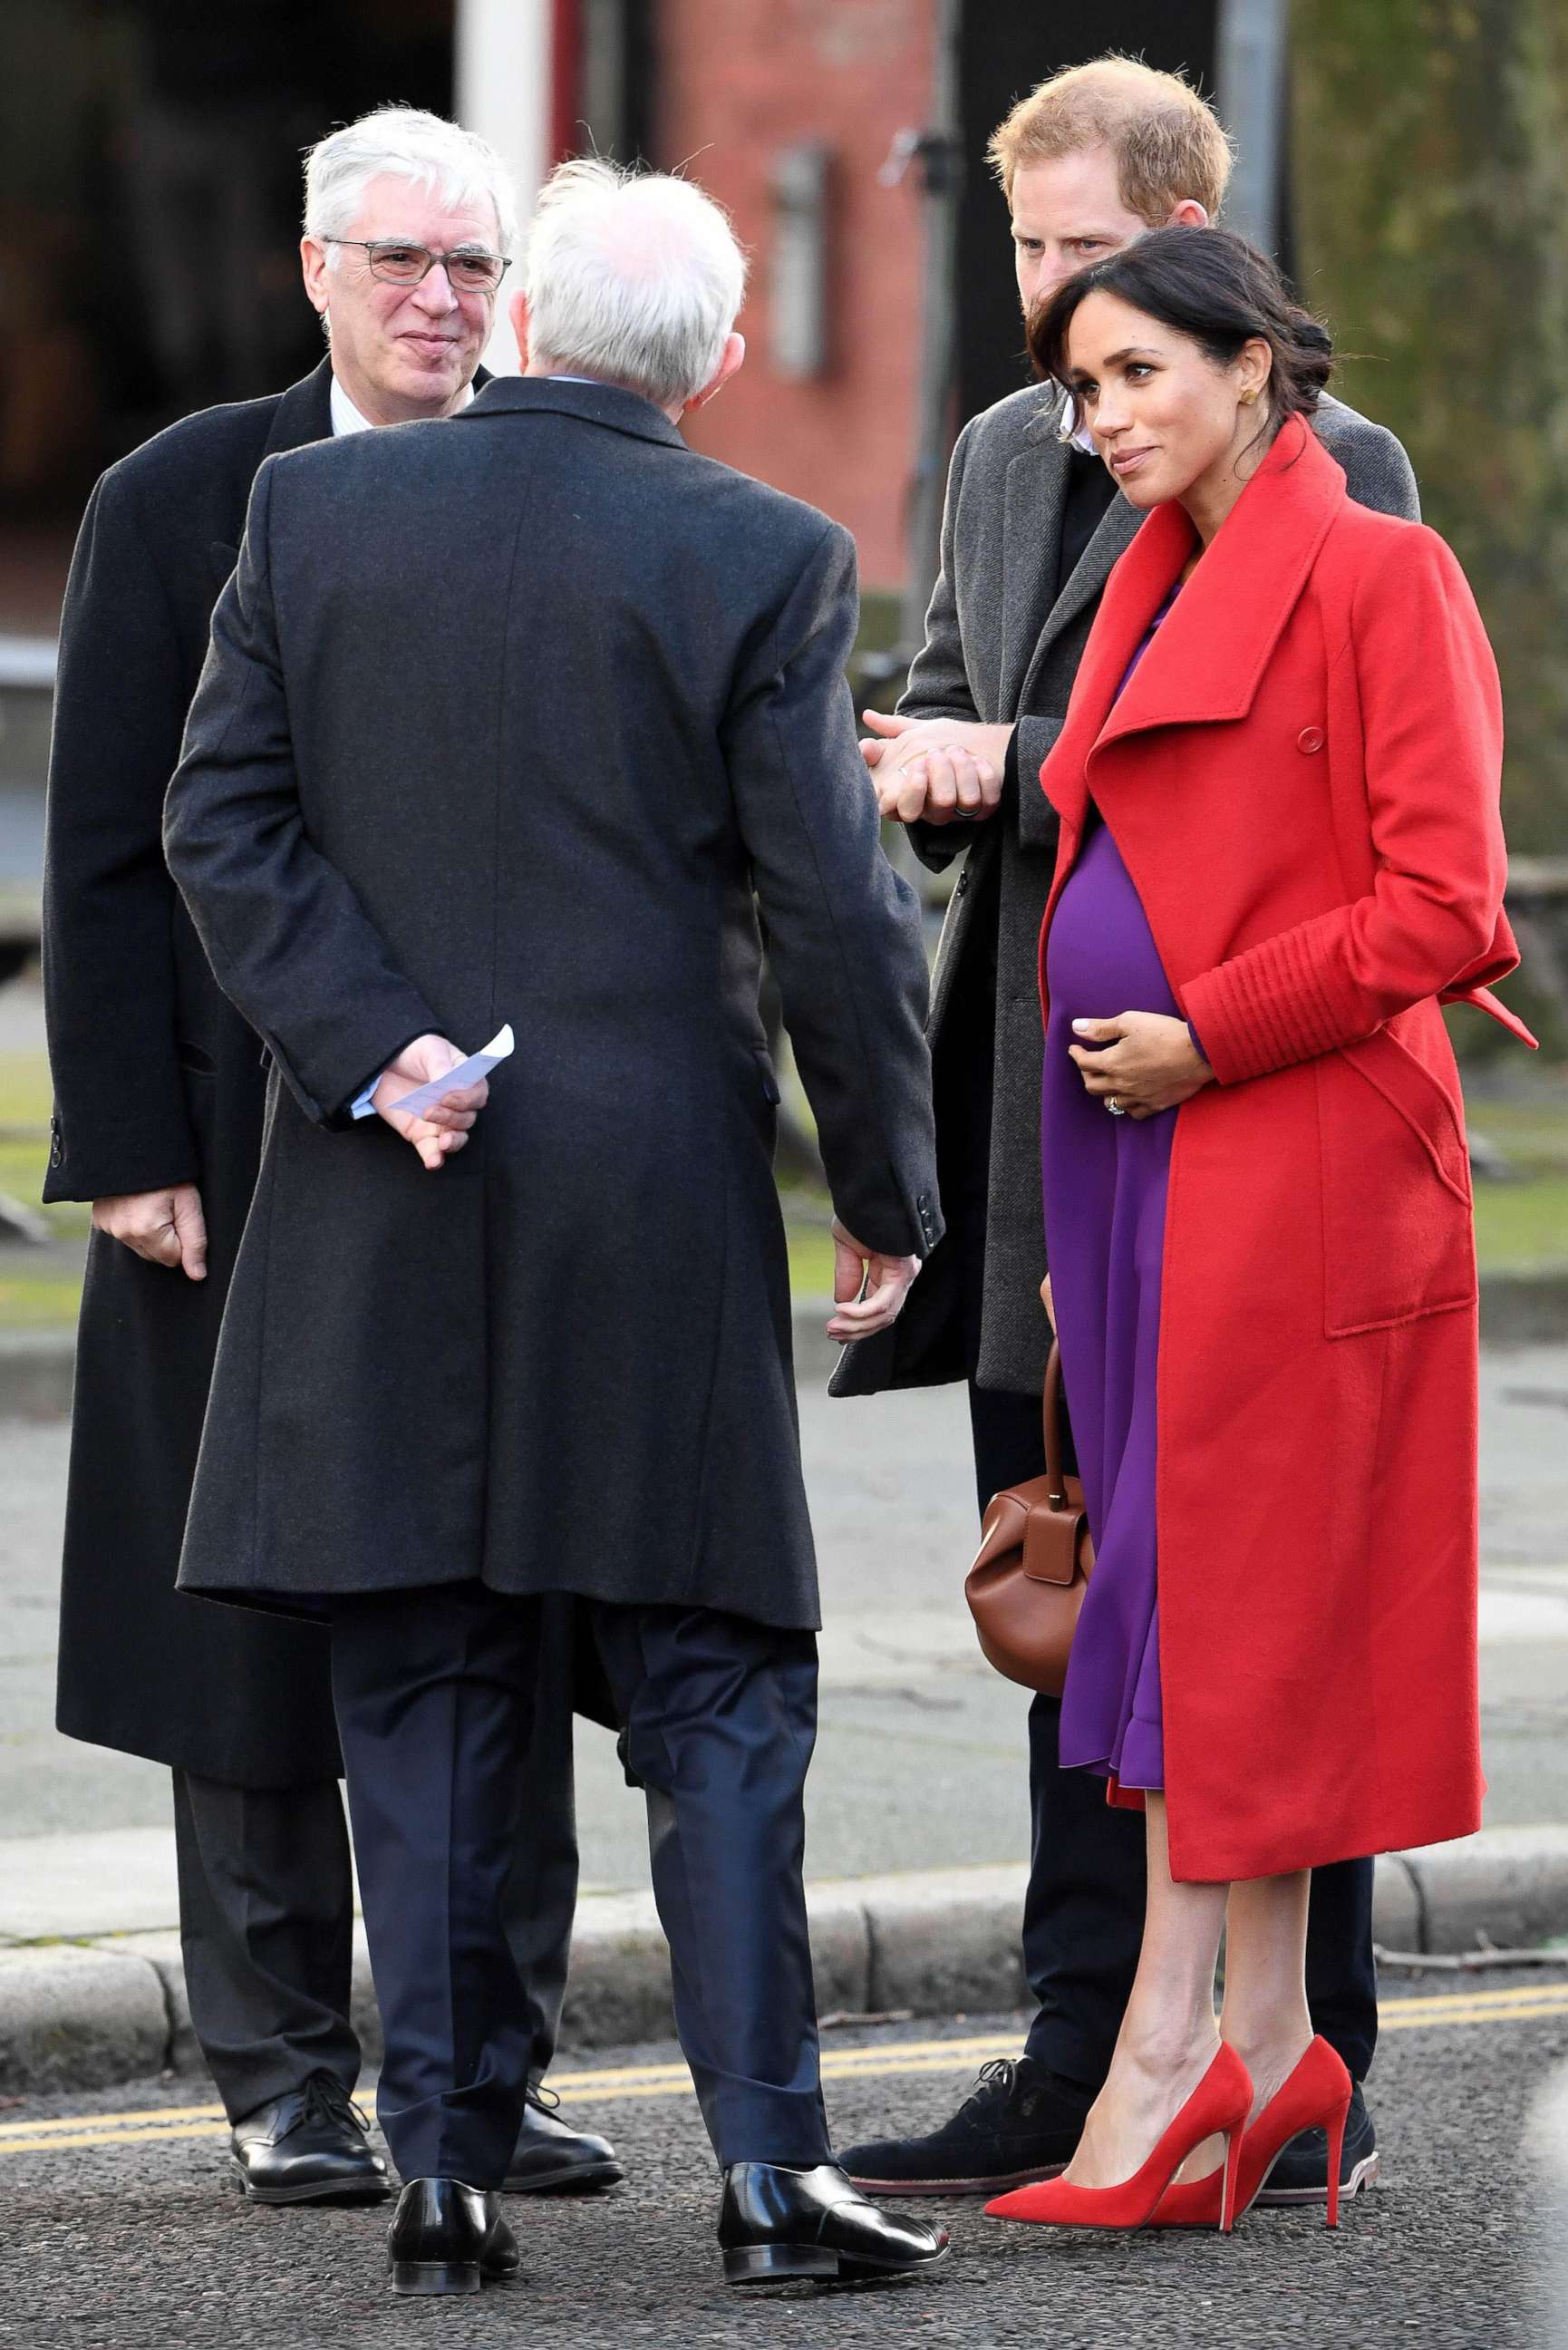 PHOTO: Britain's Prince Harry, Duke of Sussex and Meghan Markle, Duchess of Sussex are greeted as they arrive to visit Birkenhead, northwest England, Jan. 14, 2019.